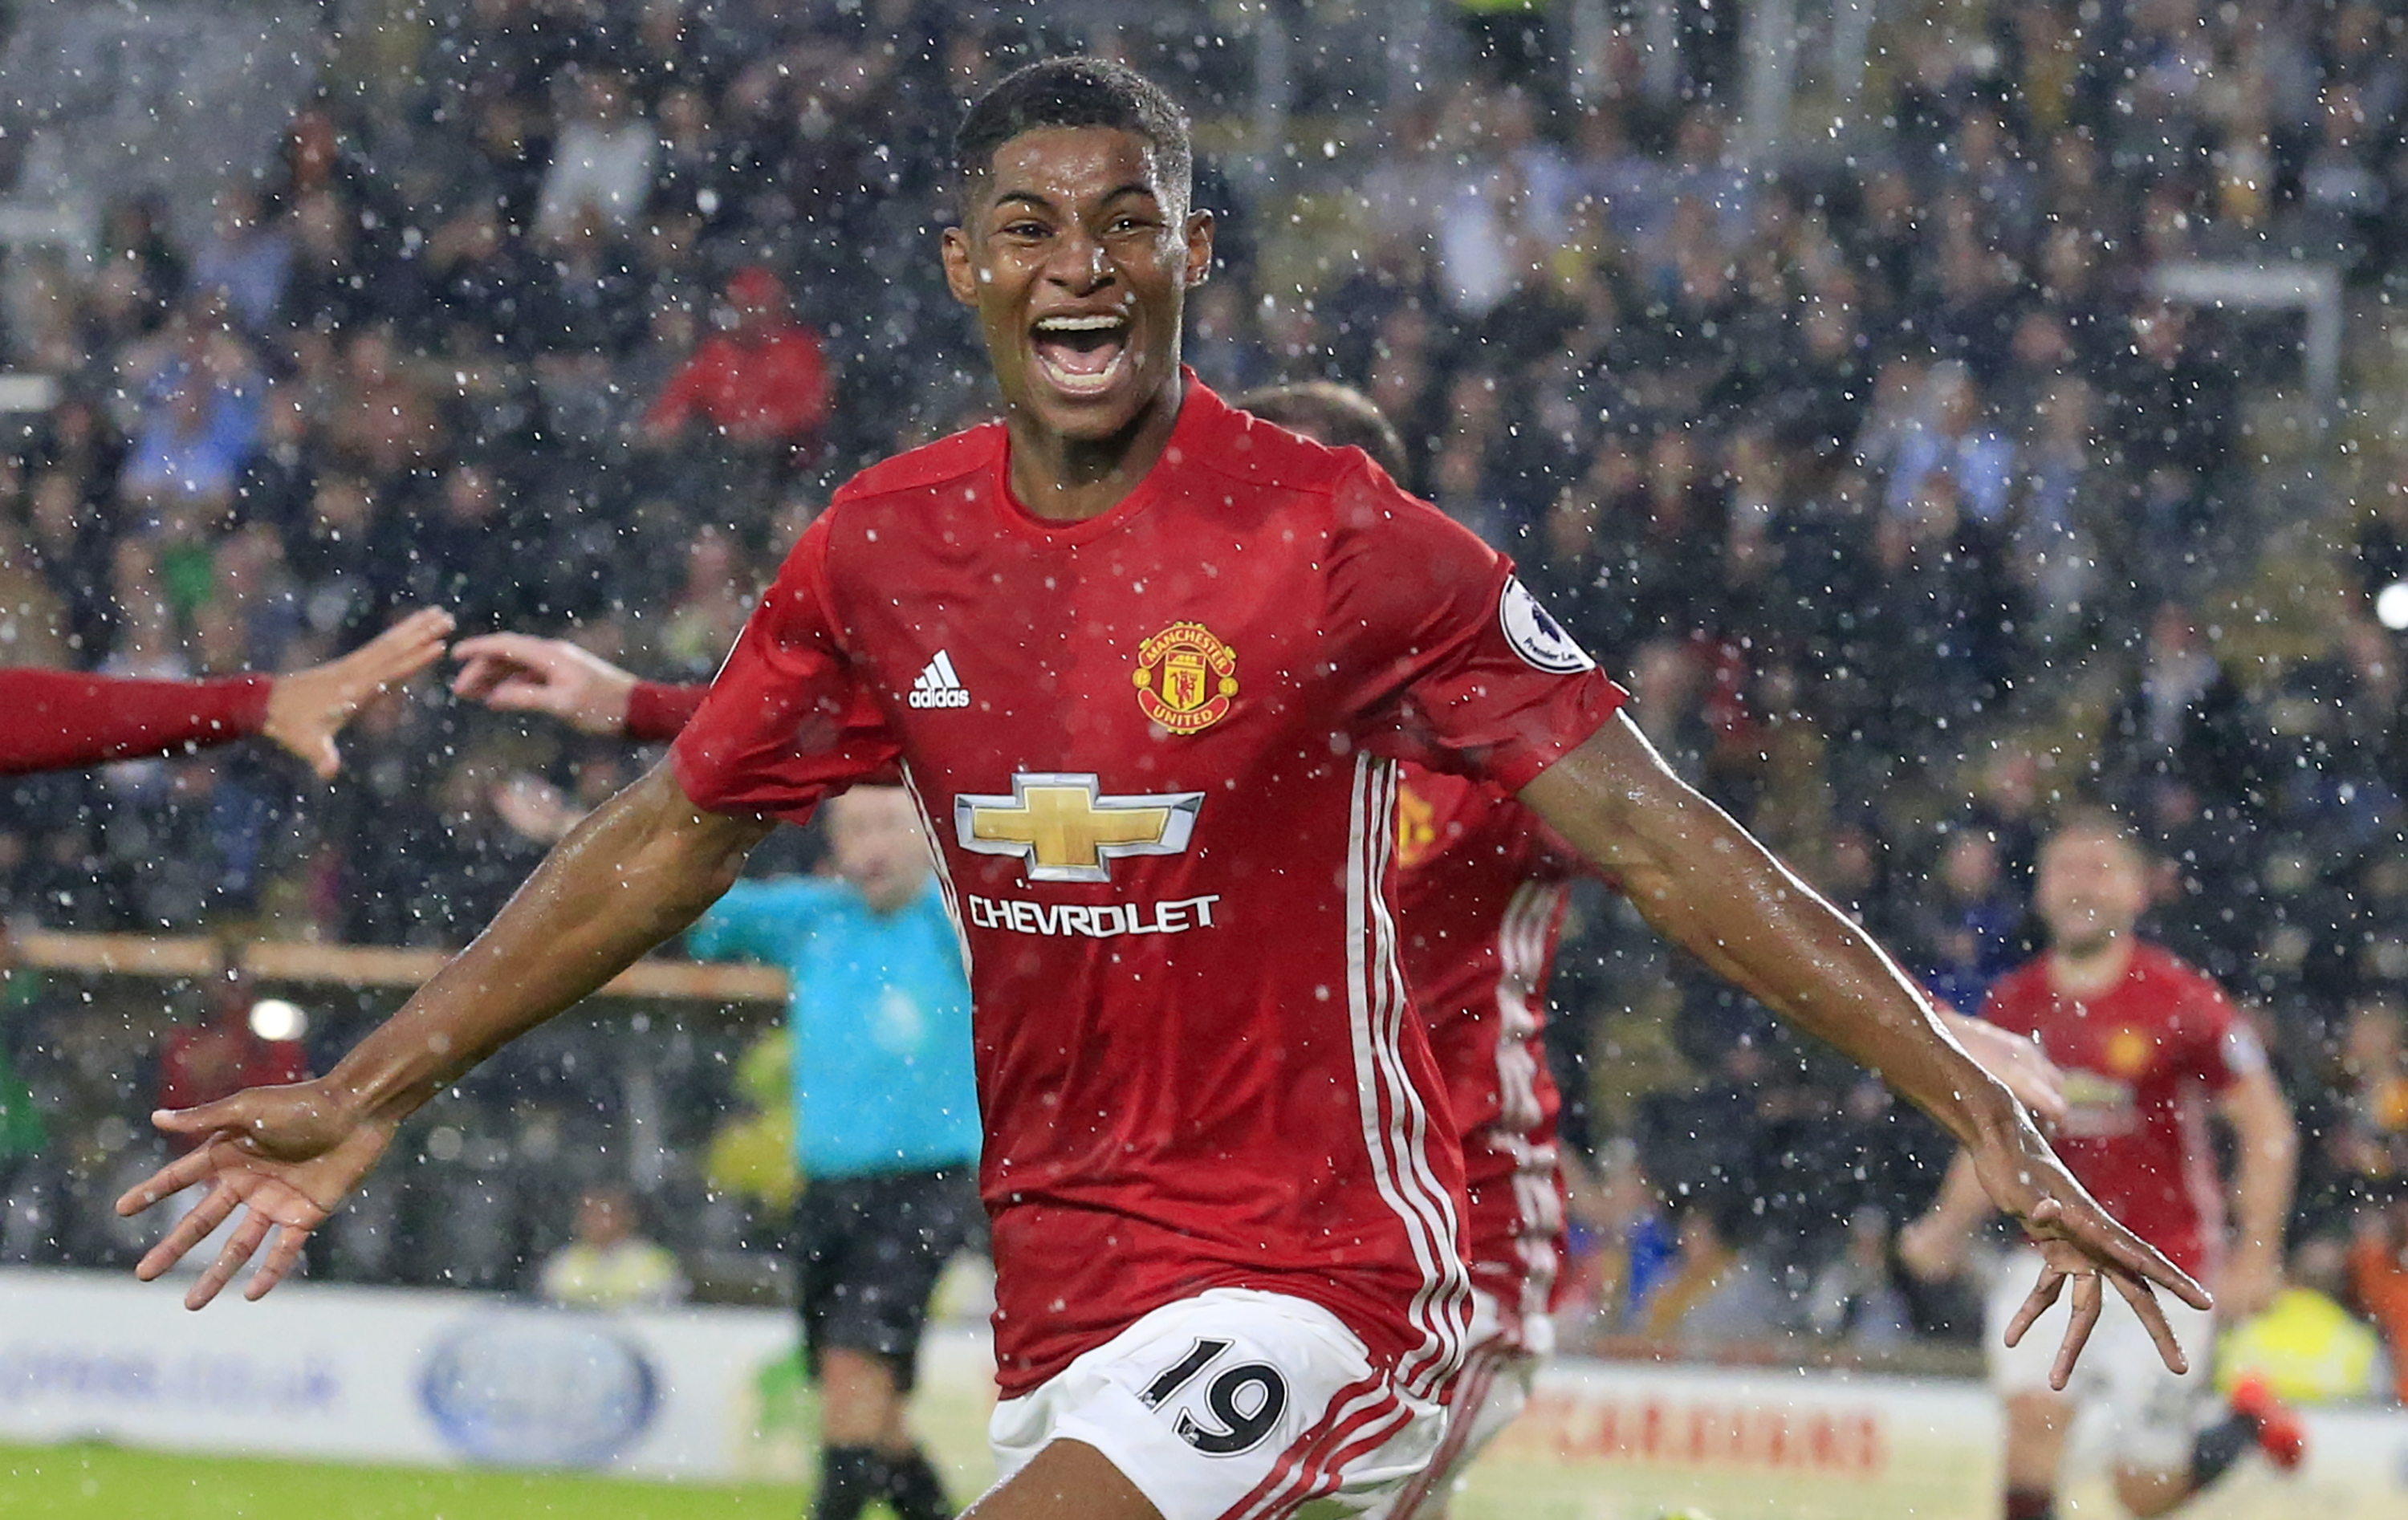 Manchester United's English striker Marcus Rashford celebrates after scoring their late winning goal during the English Premier League football match between Hull City and Manchester United at the KCOM Stadium in Kingston upon Hull, north east England on August 27, 2016.
Manchester united won the game 1-0. / AFP / Lindsey PARNABY / RESTRICTED TO EDITORIAL USE. No use with unauthorized audio, video, data, fixture lists, club/league logos or 'live' services. Online in-match use limited to 75 images, no video emulation. No use in betting, games or single club/league/player publications.  /         (Photo credit should read LINDSEY PARNABY/AFP/Getty Images)